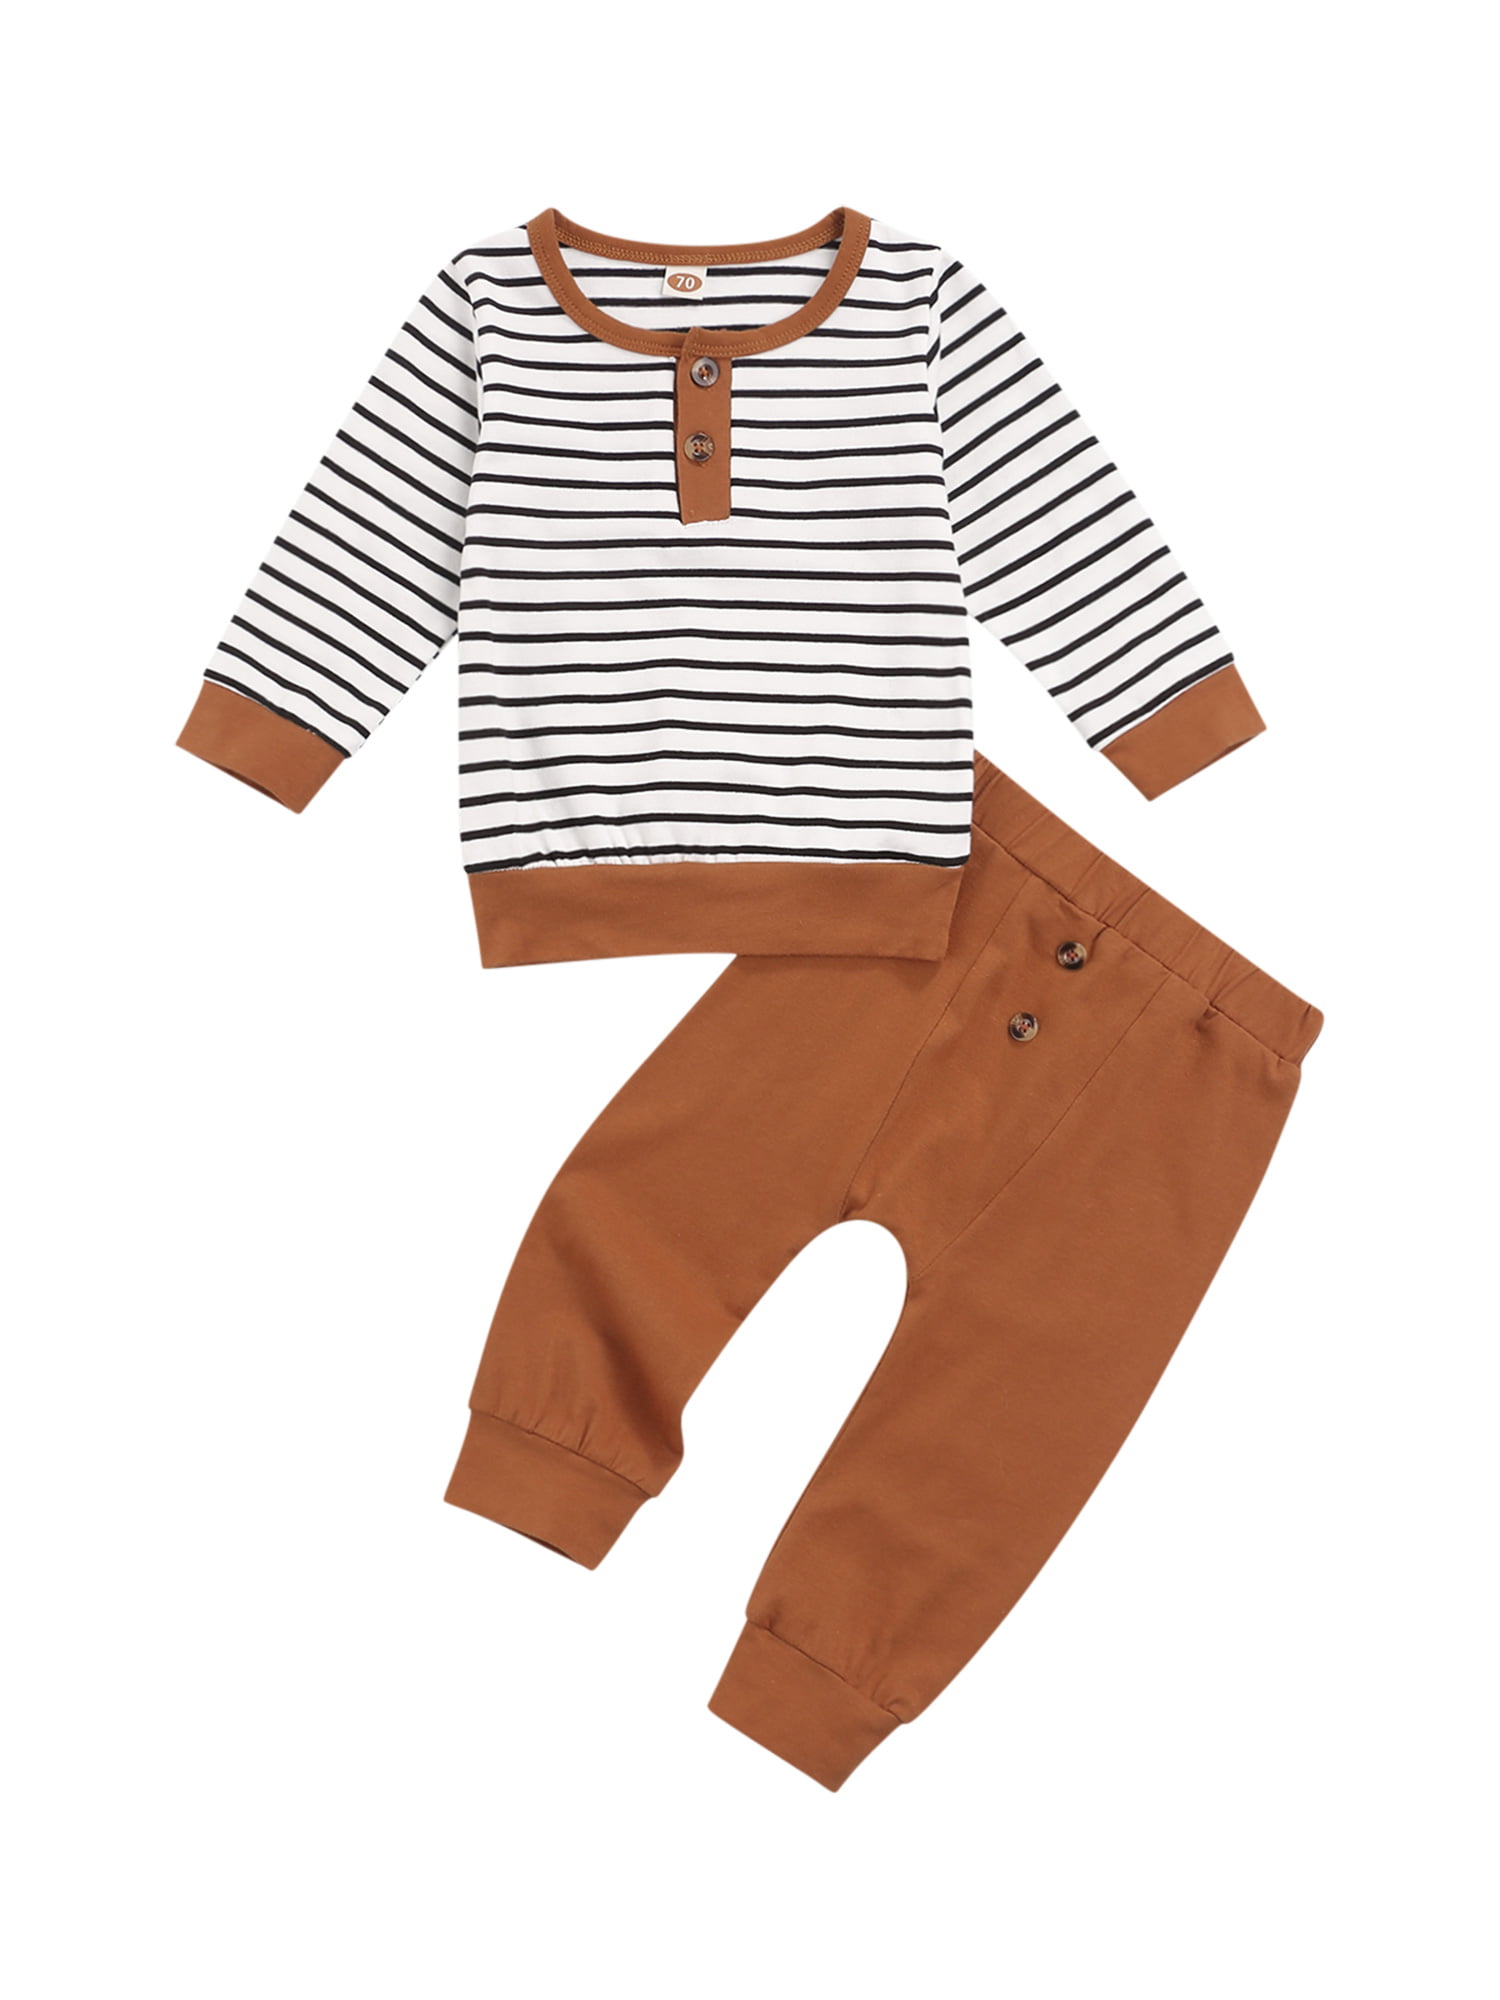 Baby Boy Clothes Long Sleeve Cartoon Print Hoodie Sweatshirt Tops and Striped Pants Sweatsuit Outfits Set